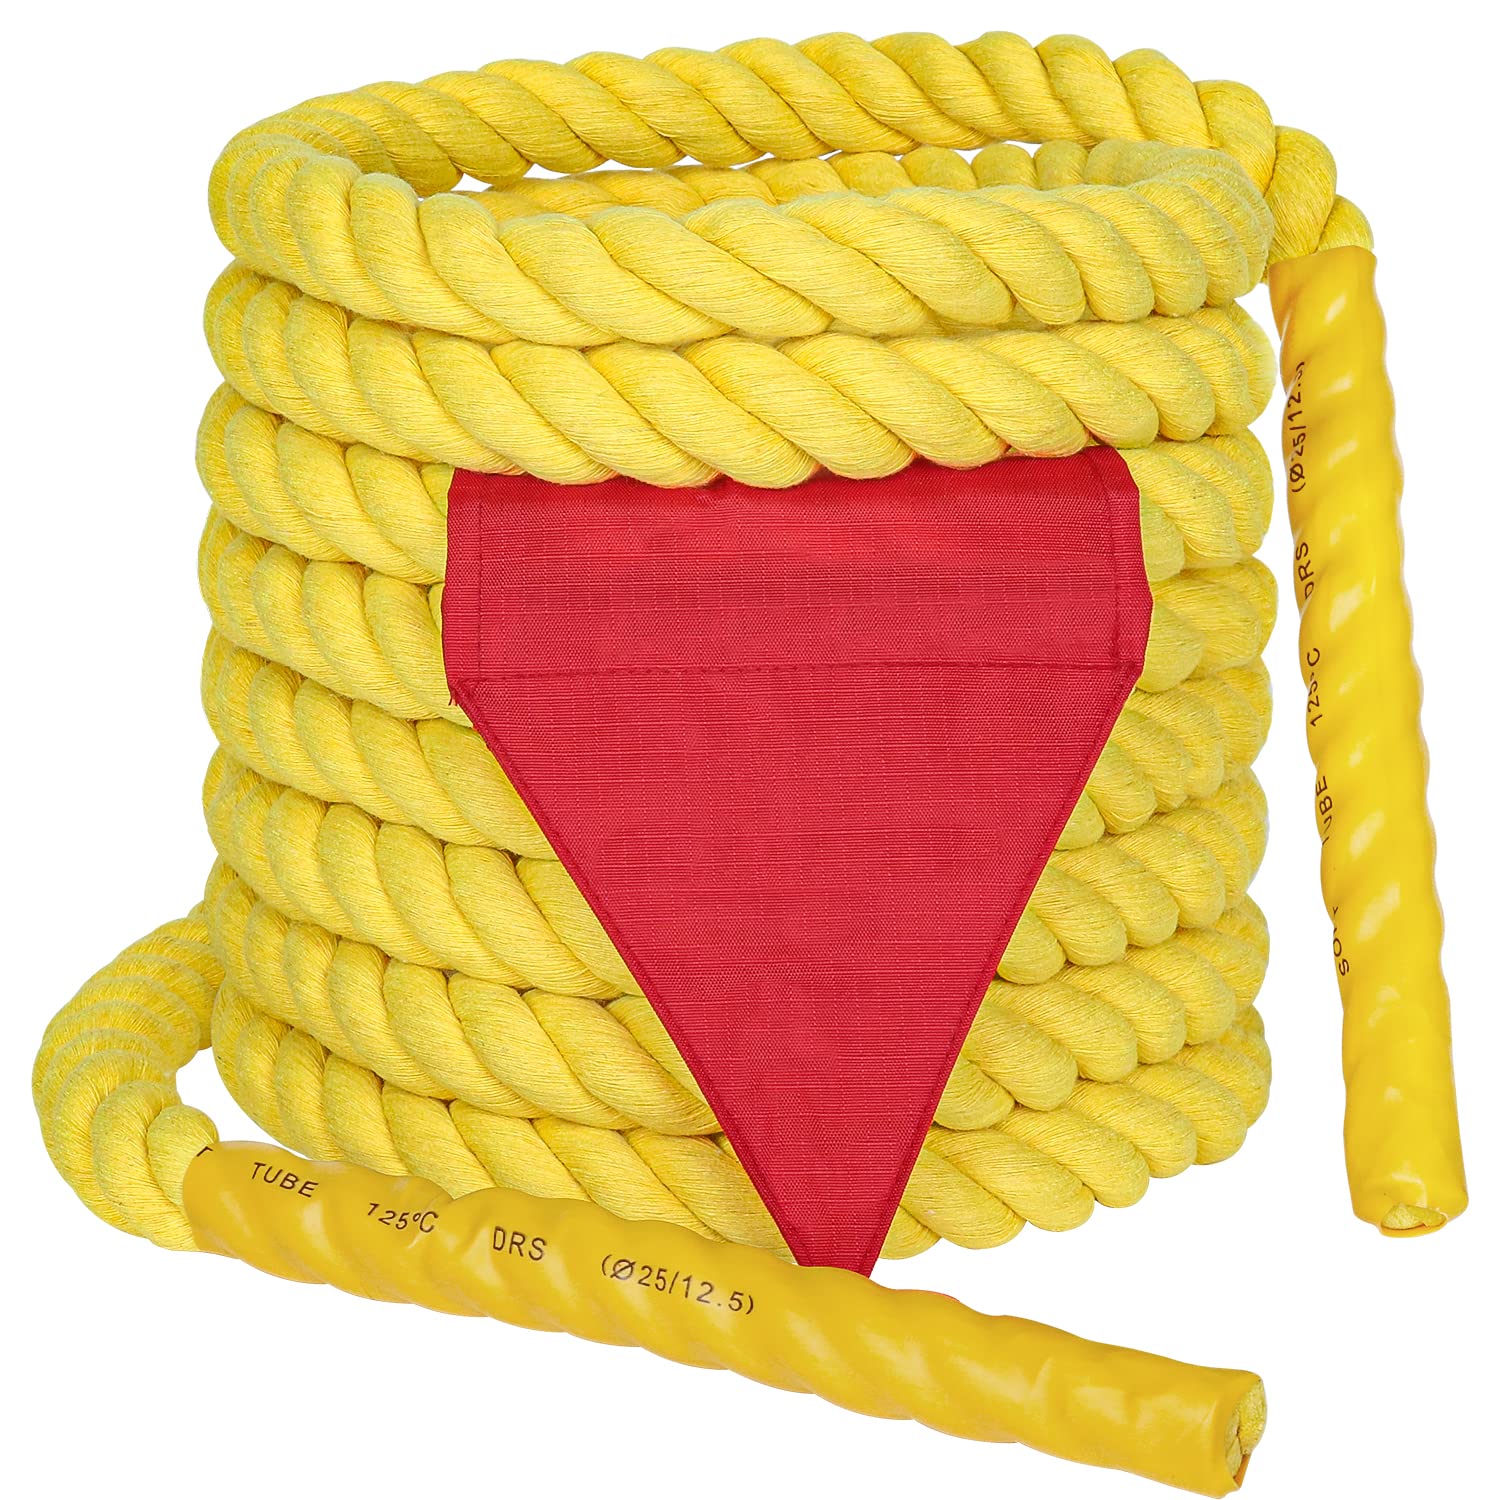 X XBEN Tug of War Rope with Flag for Kids, Teens and Adults, Soft